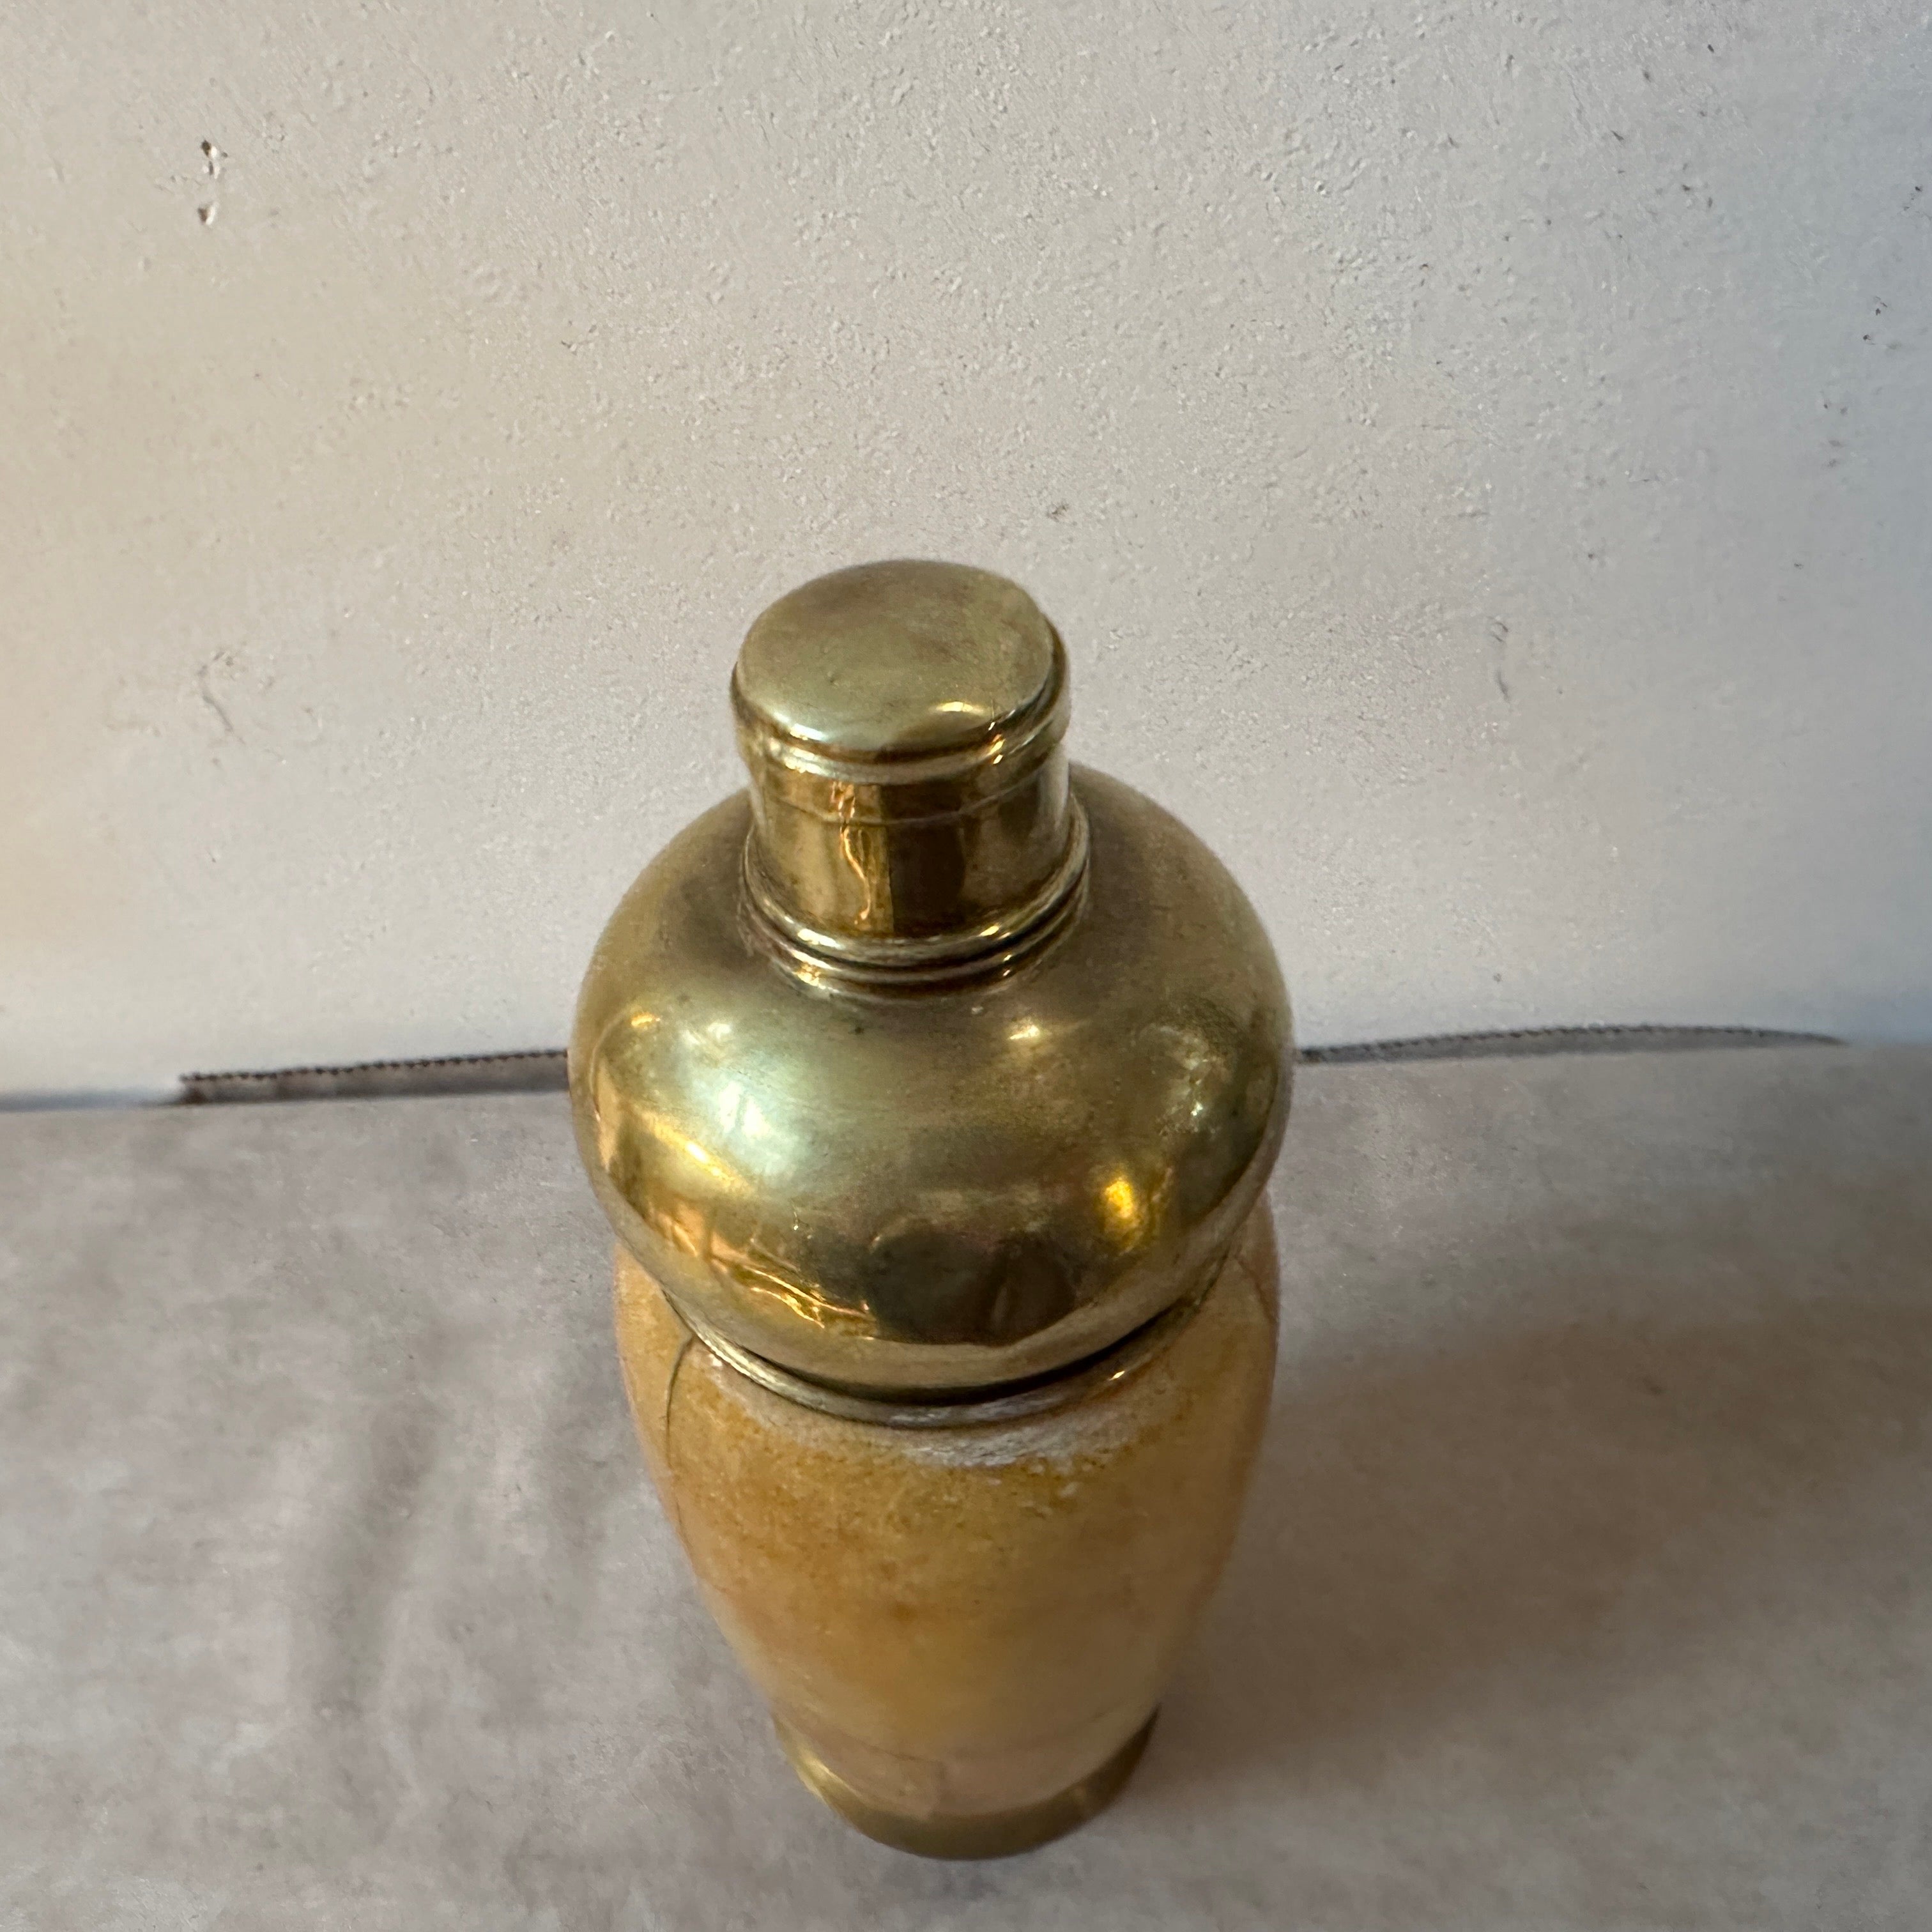 A cocktail shaker designed by Aldo Tura, it has been manufactured in Milano in the Fifties by Macabo, it's in vintage conditions with signs of use and age visible on there photos. This shaker showcases the distinctive design characteristics